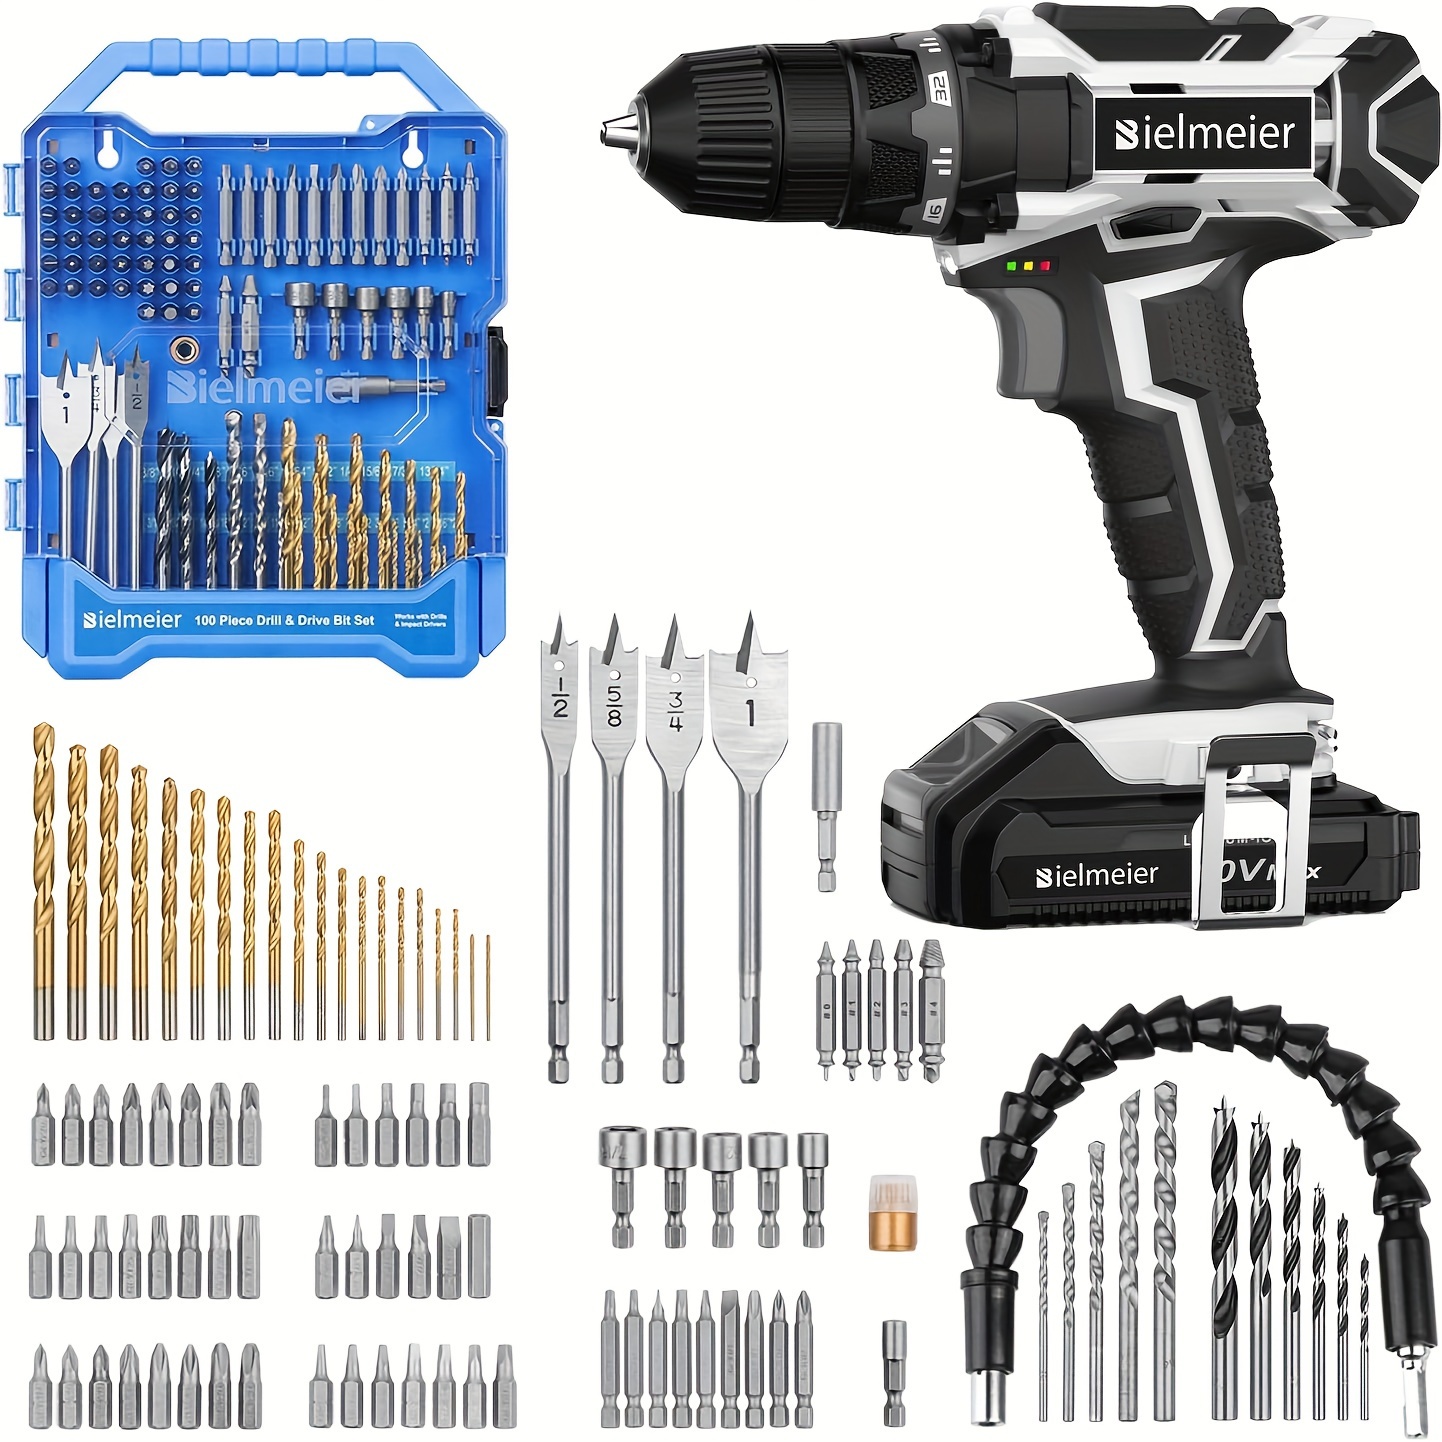 

Bielmeier 20v Cordless Power Drill Driver Set, Combo Kit With Versatile 100-piece Accessories, 3/8 Inch Keyless Chuck, Includes Battery Pack Charger, For Professional Work And Home Repair